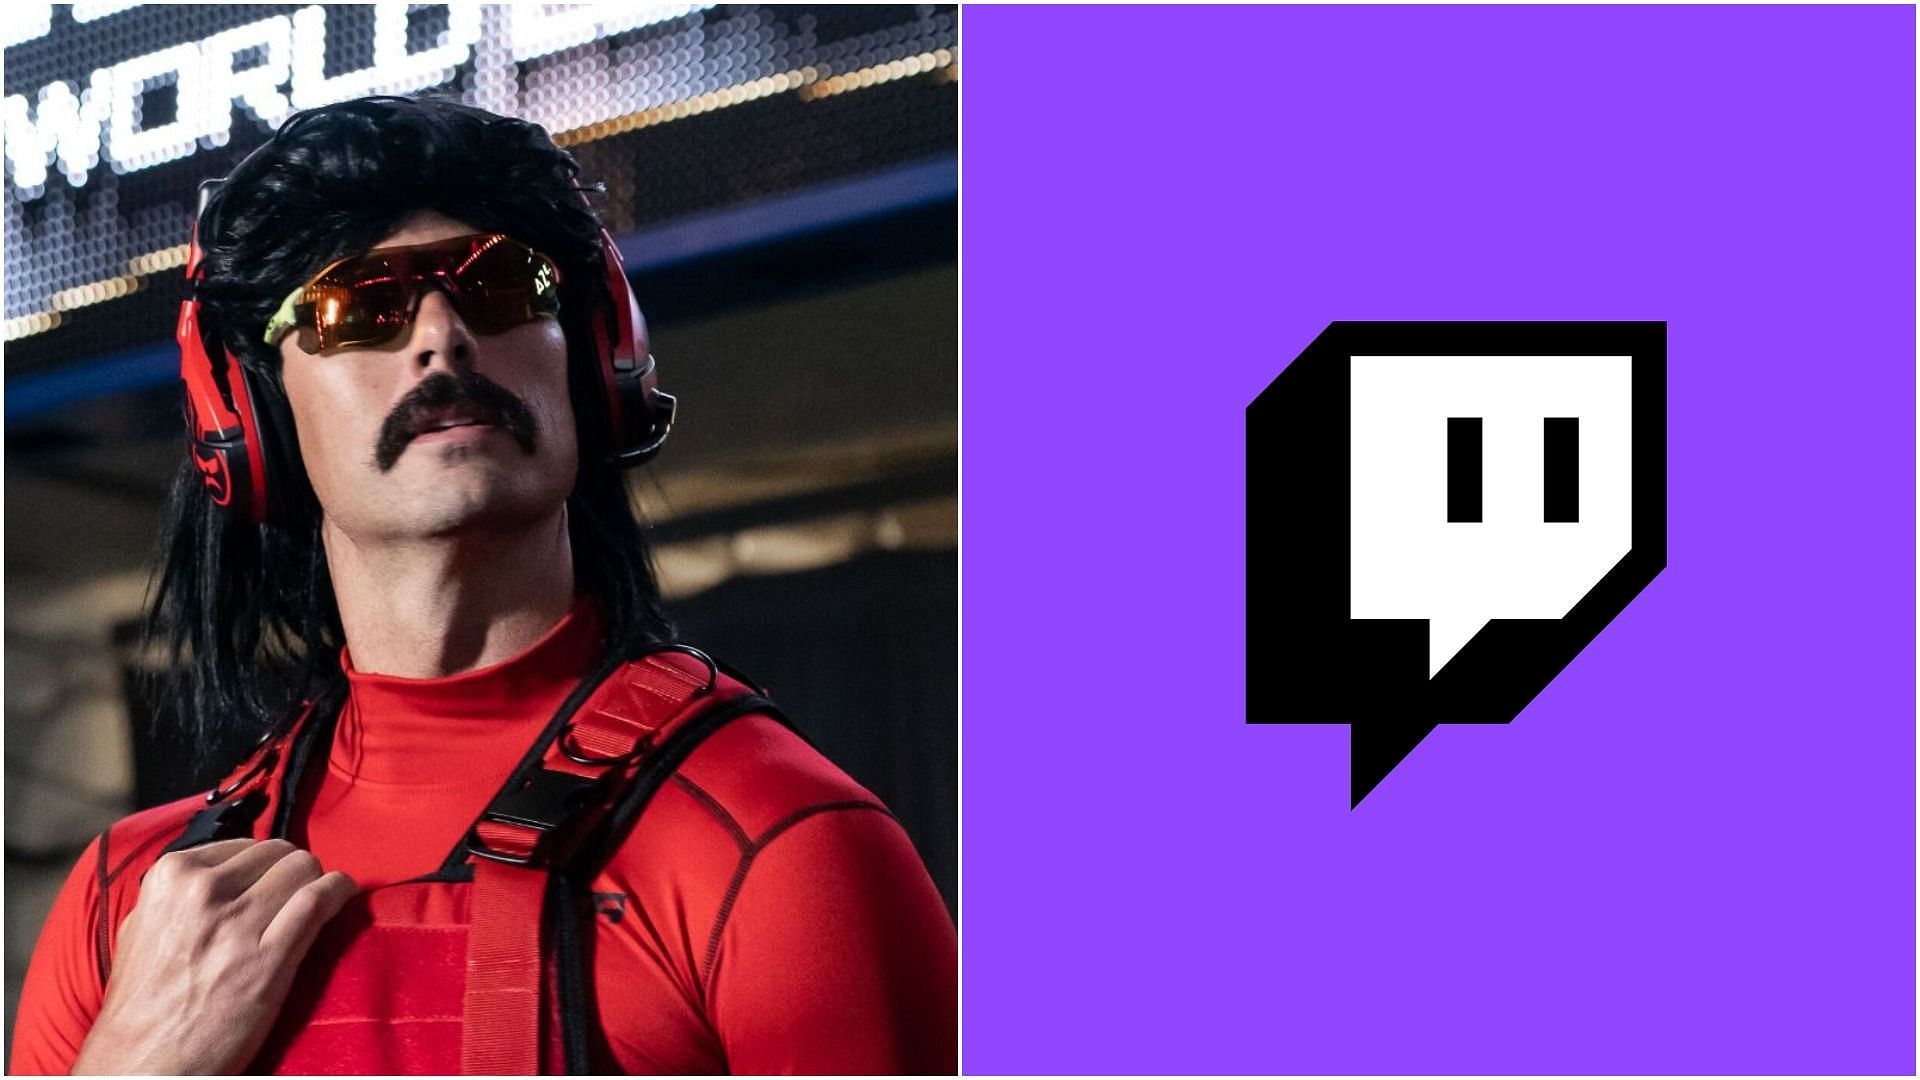 Dr Disrespect announces that he is no longer in a legal dispute with Twitch (Image via Sportskeeda)